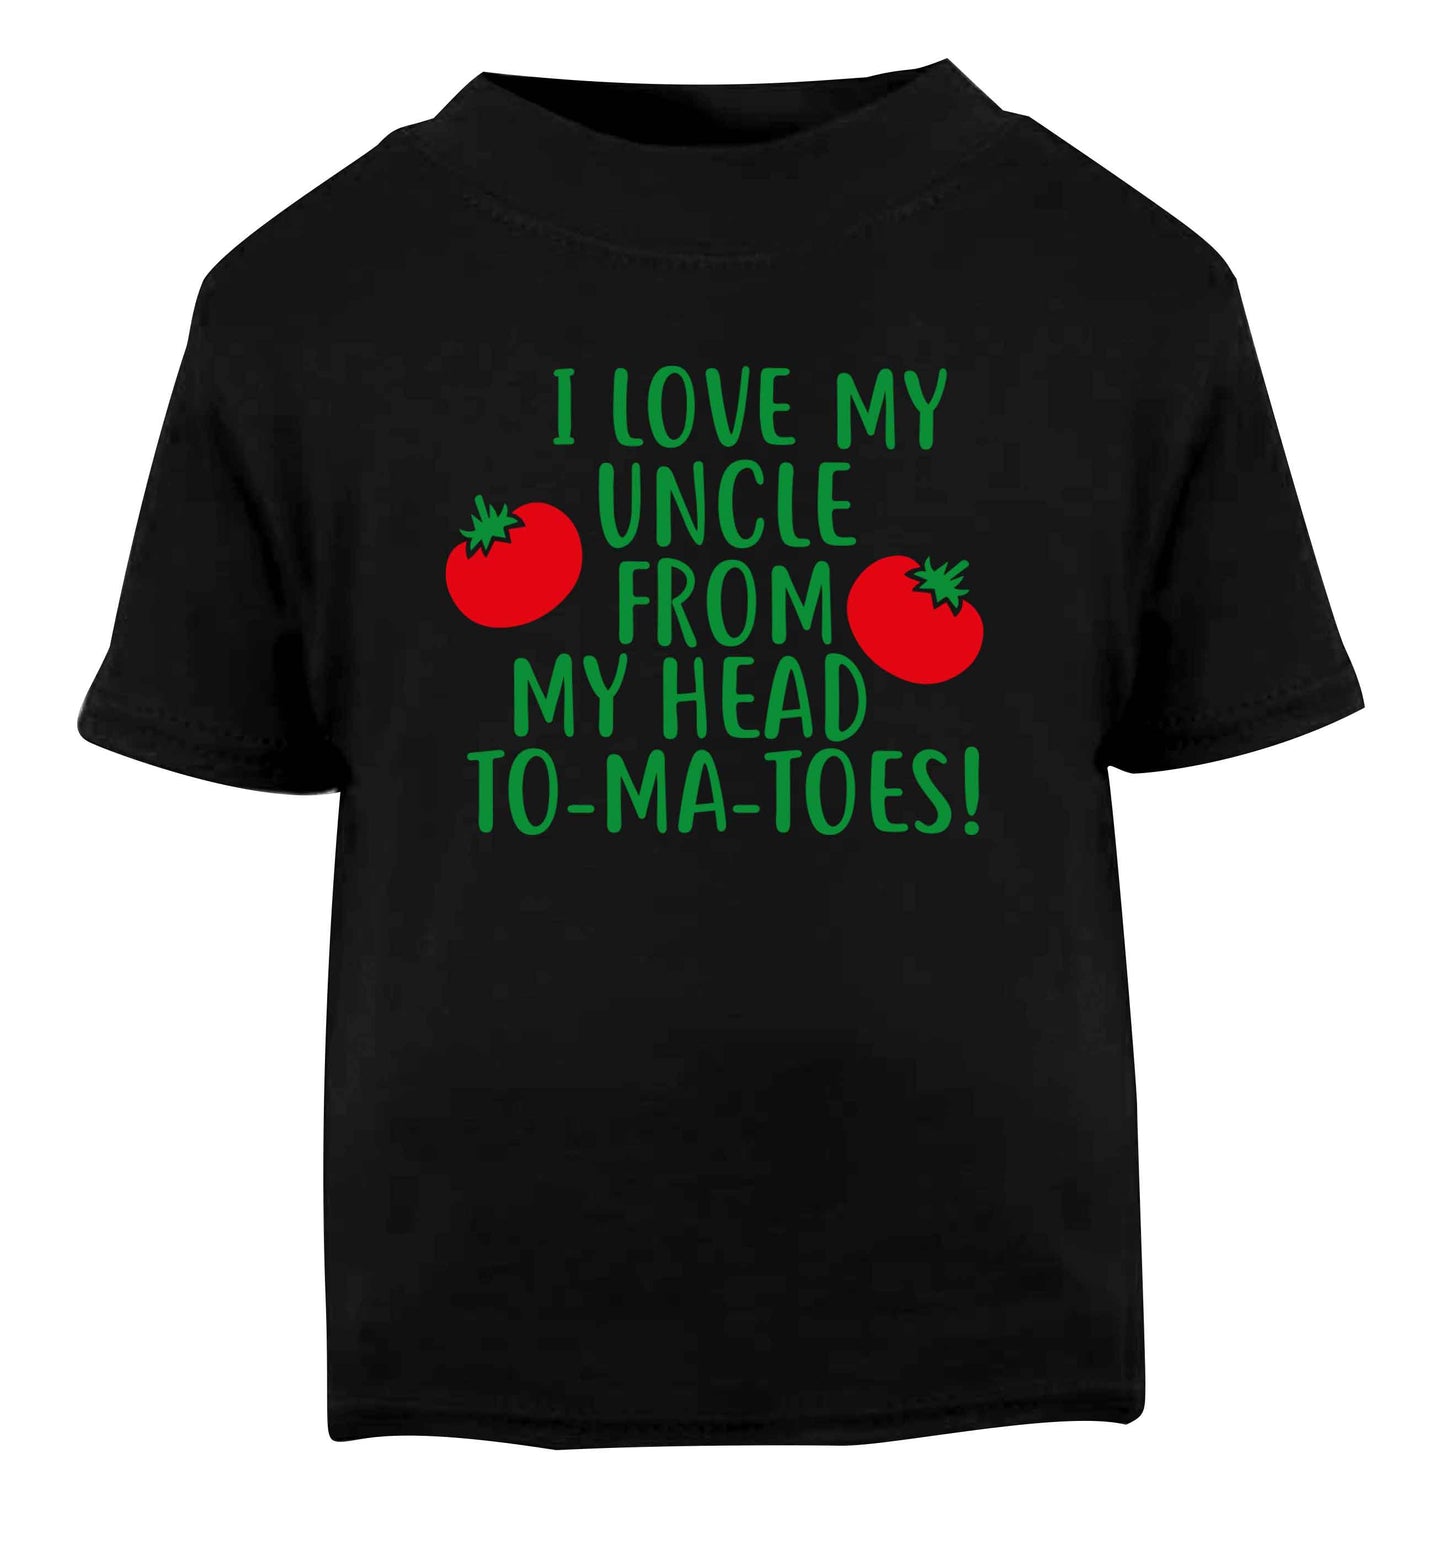 I love my uncle from my head To-Ma-Toes Black Baby Toddler Tshirt 2 years